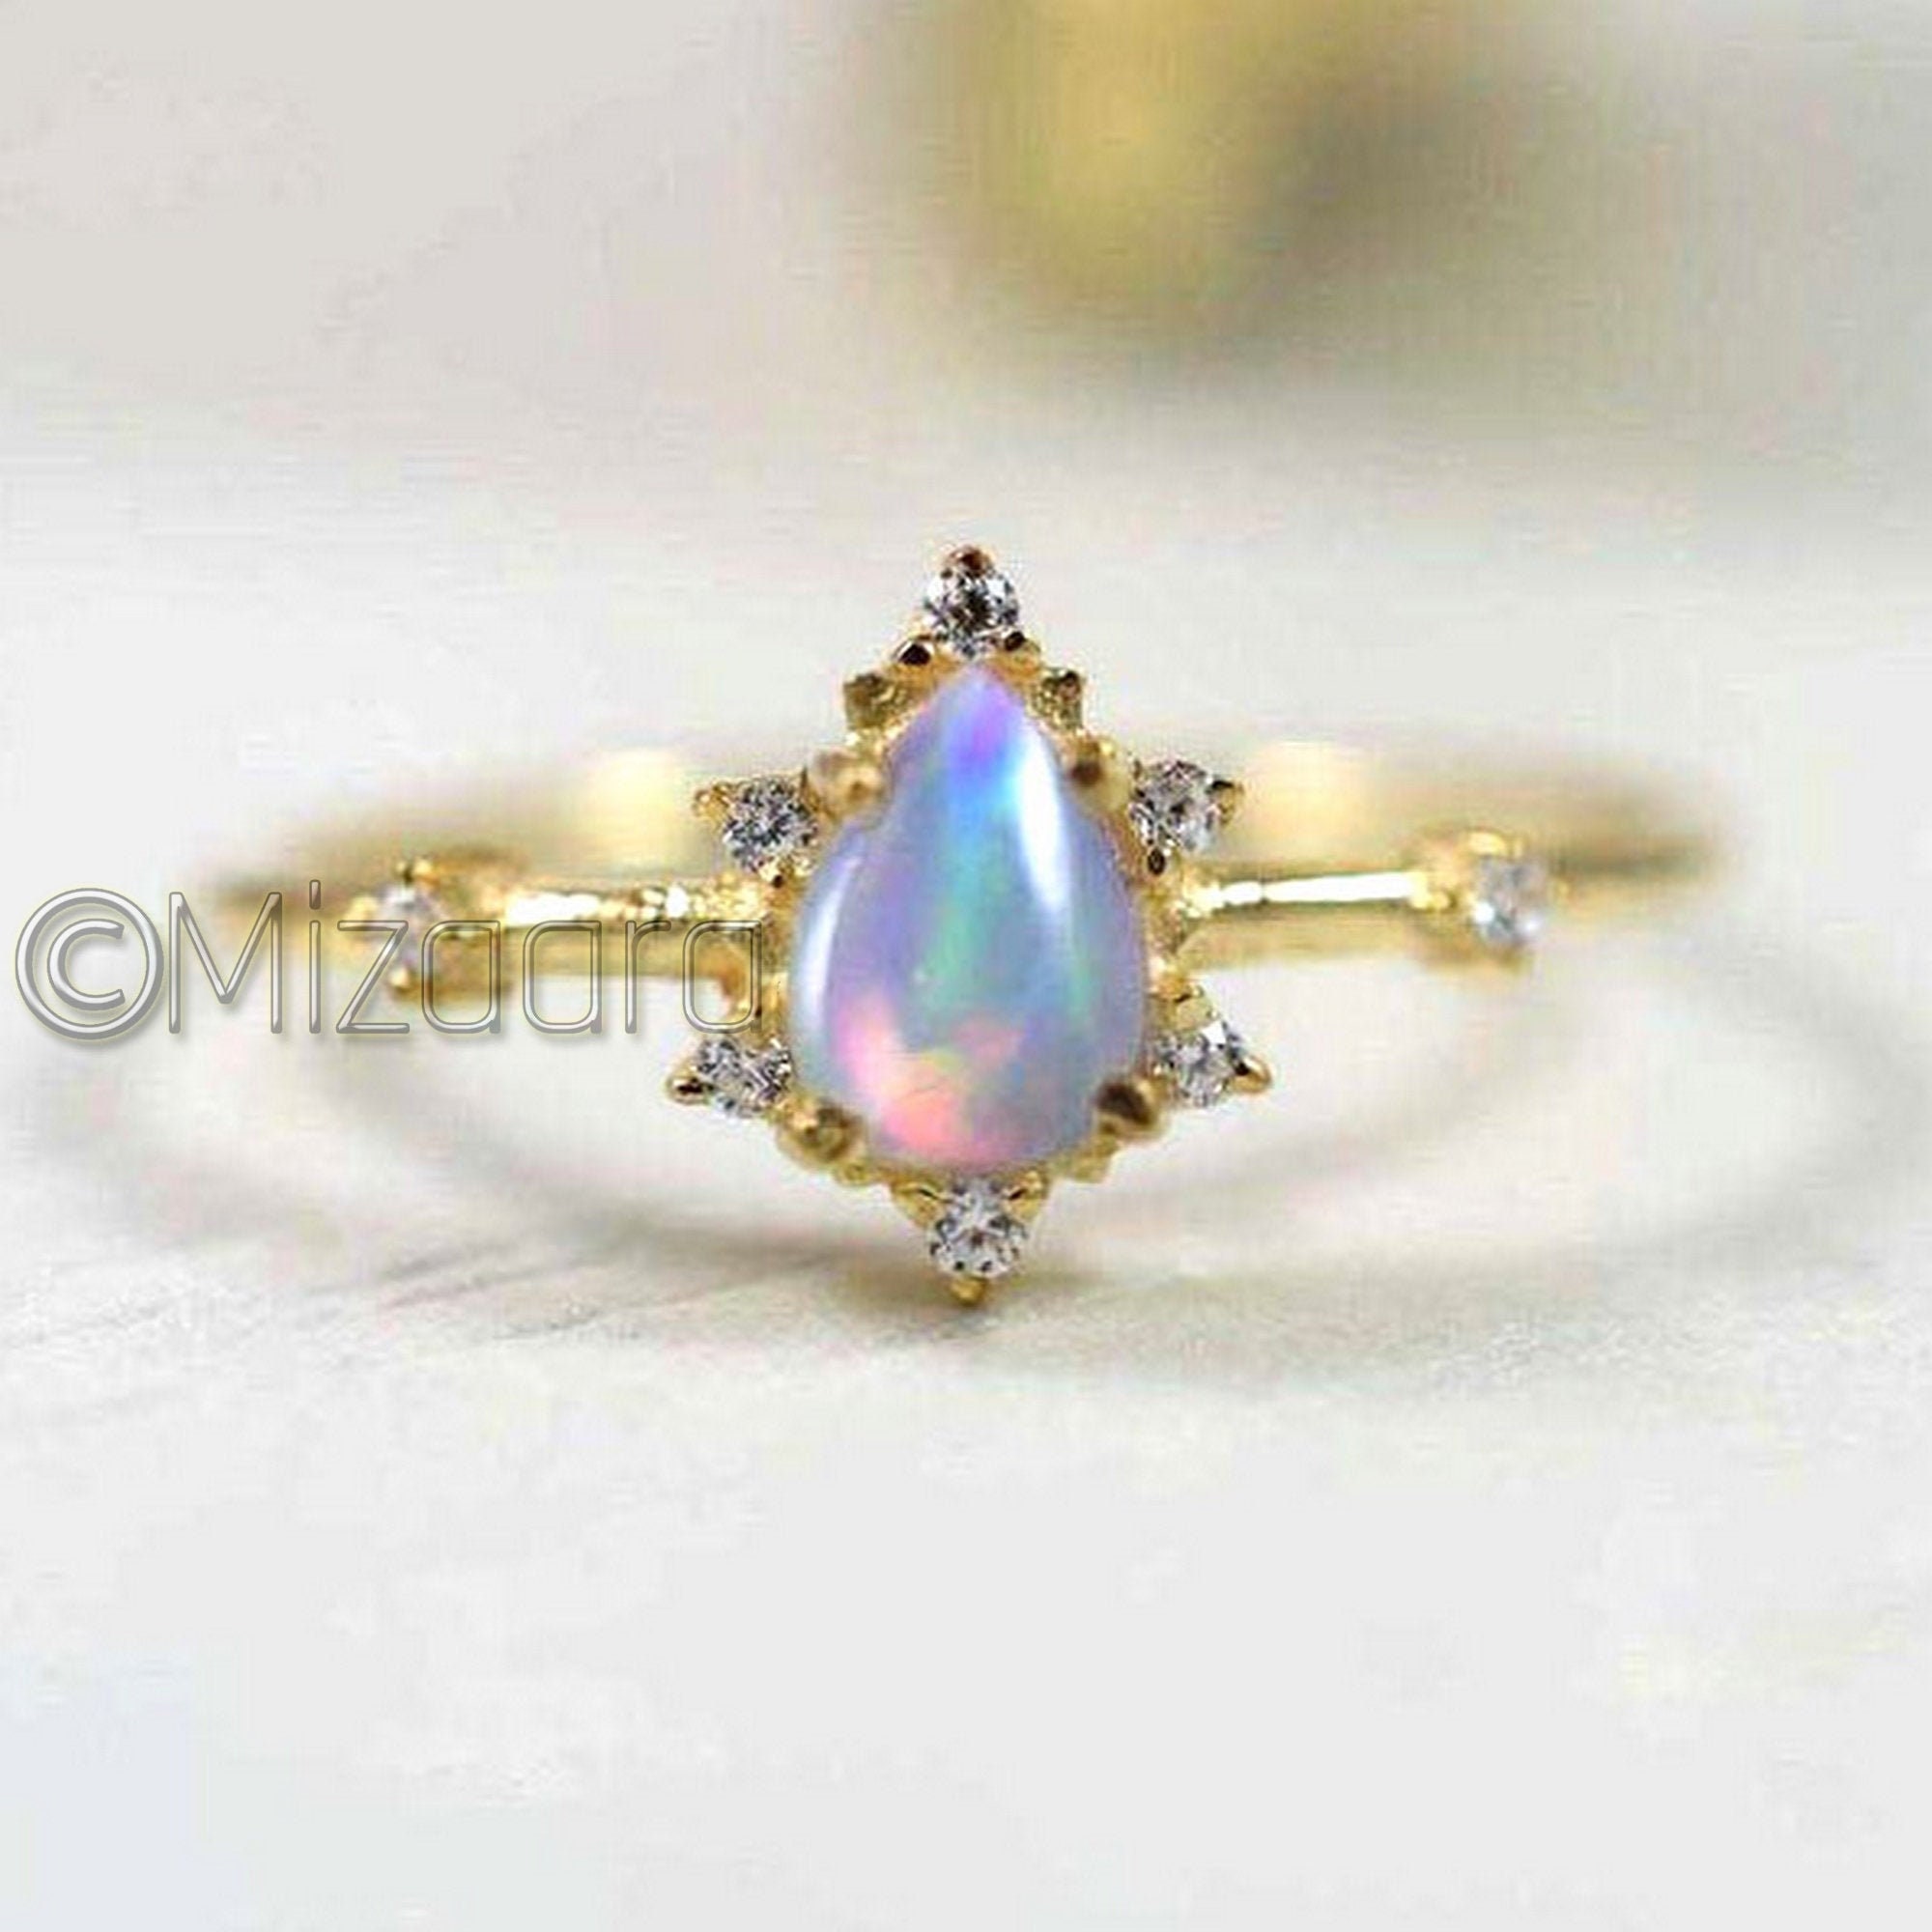 Wedding Ring Ethiopian Opal Cabochon Ring Silver Gold Platted Ring Engagement Ring Statement Ring Women Ring 925 Sterling Silver Ring